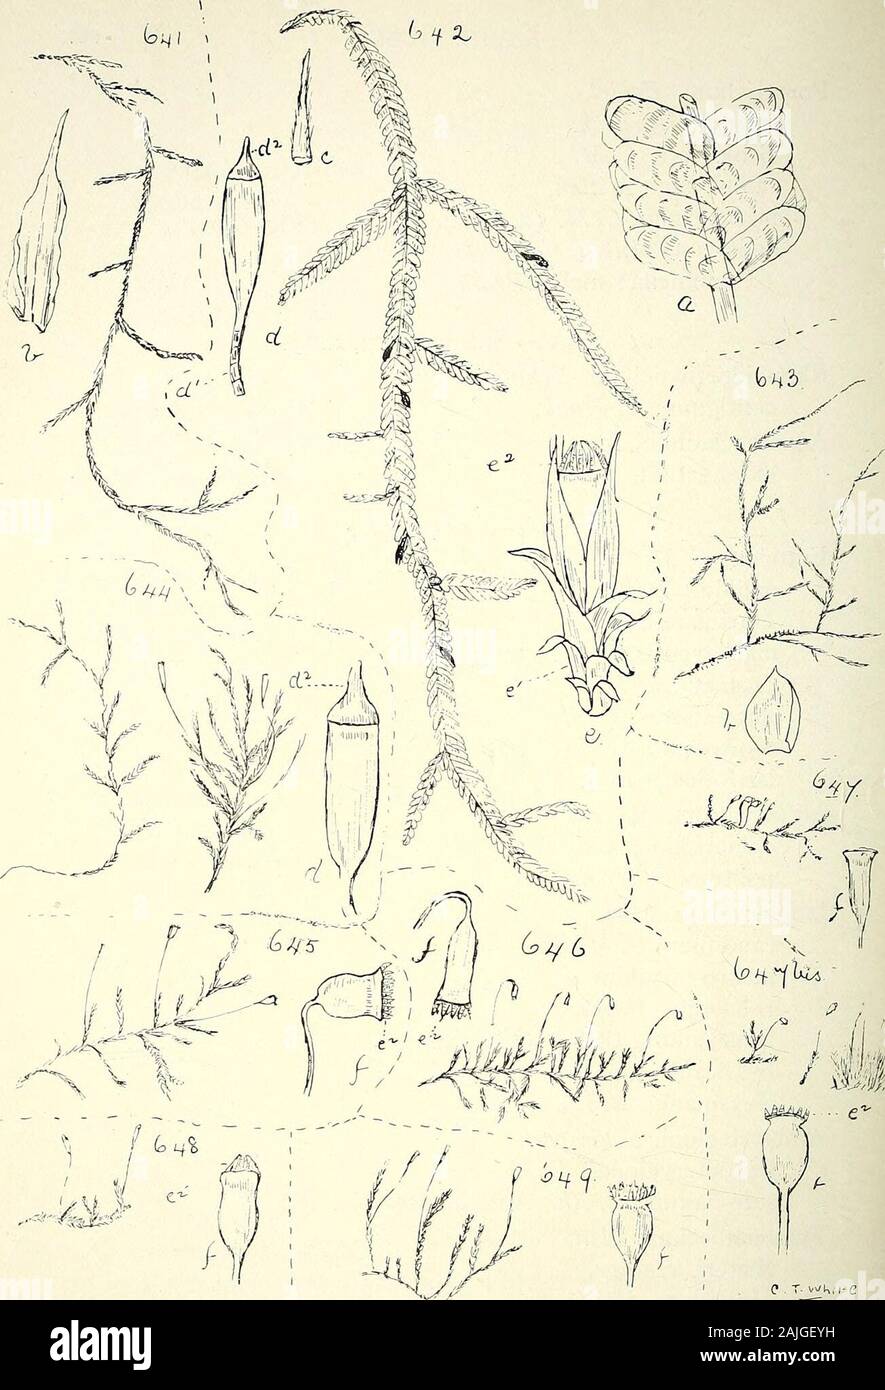 Comprehensive catalogue of Queensland plants, both indigenous and naturalised To which are added, where known, the aboriginal and other vernacular names; with numerous illustrations, and copious notes on the properties, features, &c., of the plants . , Broth., Aus. Mosses No. 127.Homalia, Brid. Baileyana, C M. CLVIII. MUSCI. 6G7 Porotrichum, Bridel.vagum, Hornsch.Schlosseri, C. M. ramulosum. Mitten. brisbanicum, CM. (as Thamniella). (Fig. 643.)deflexum. Mitten.(Thamniella) molle, Broth. XV.—Sematophylle^e.Rliaphidorrlrynchum, Schimper, contiguum, /. Hook.Acanthocladimn, Mitt. extenuatum, Bride Stock Photo